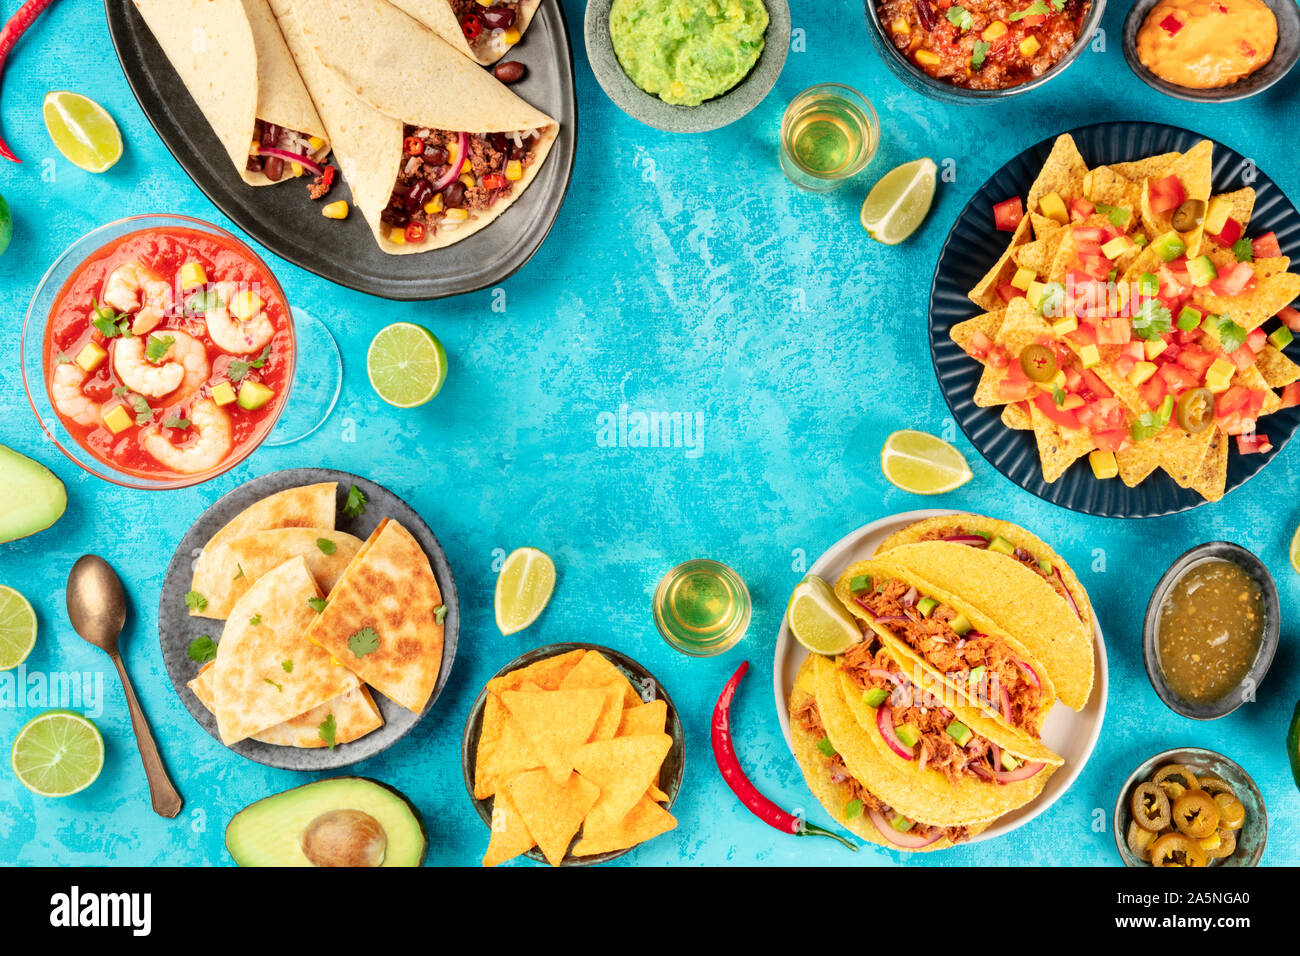 Mexican food, many dishes of the cuisine of Mexico, flat lay, shot from the top on a vibrant blue background, forming a frame with a place for text Stock Photo